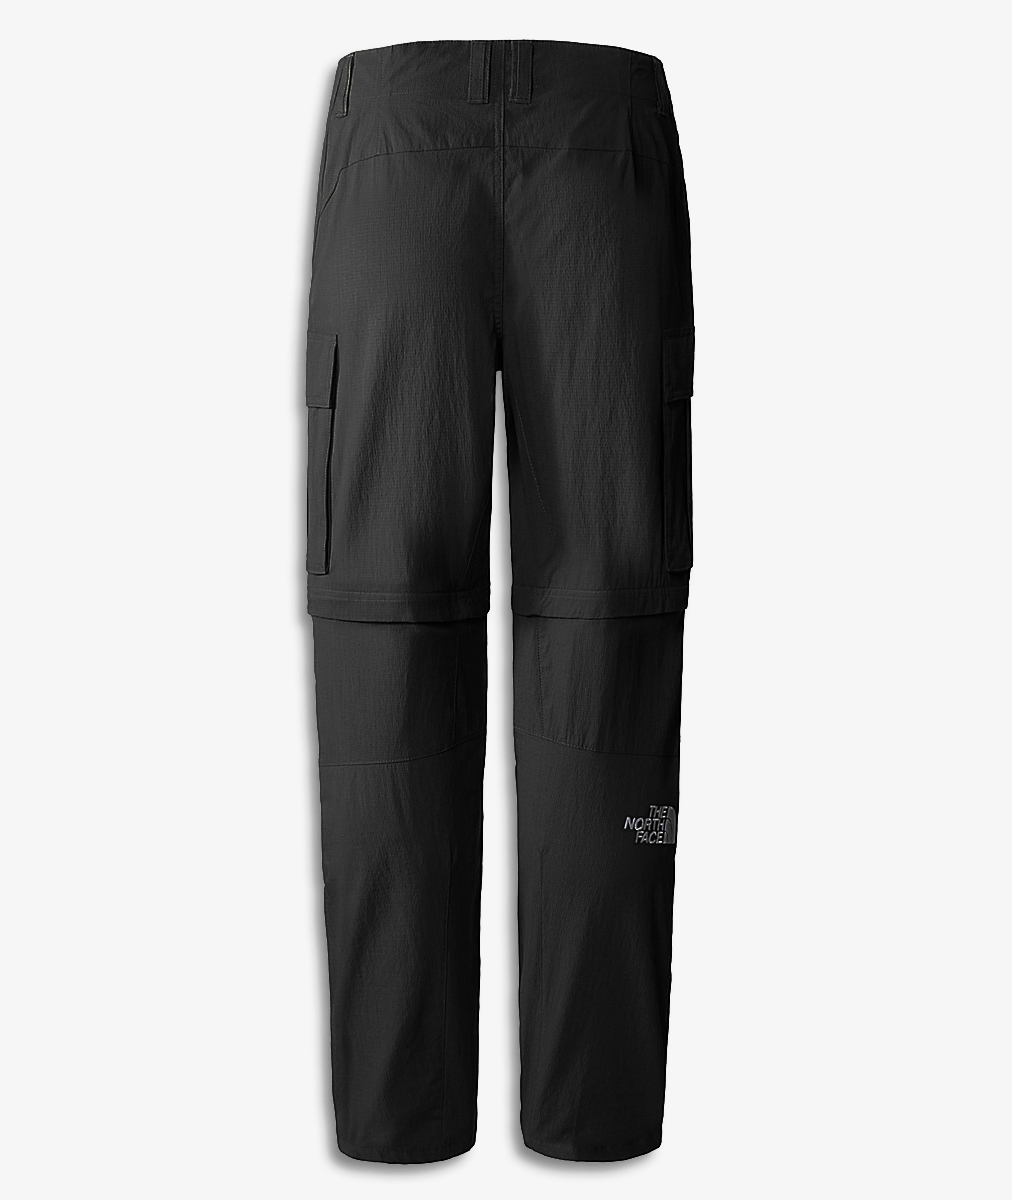 https://www.norsestore.com/shared/174/551/the-north-face-m-nse-convertible-cargo-pants_u.jpg